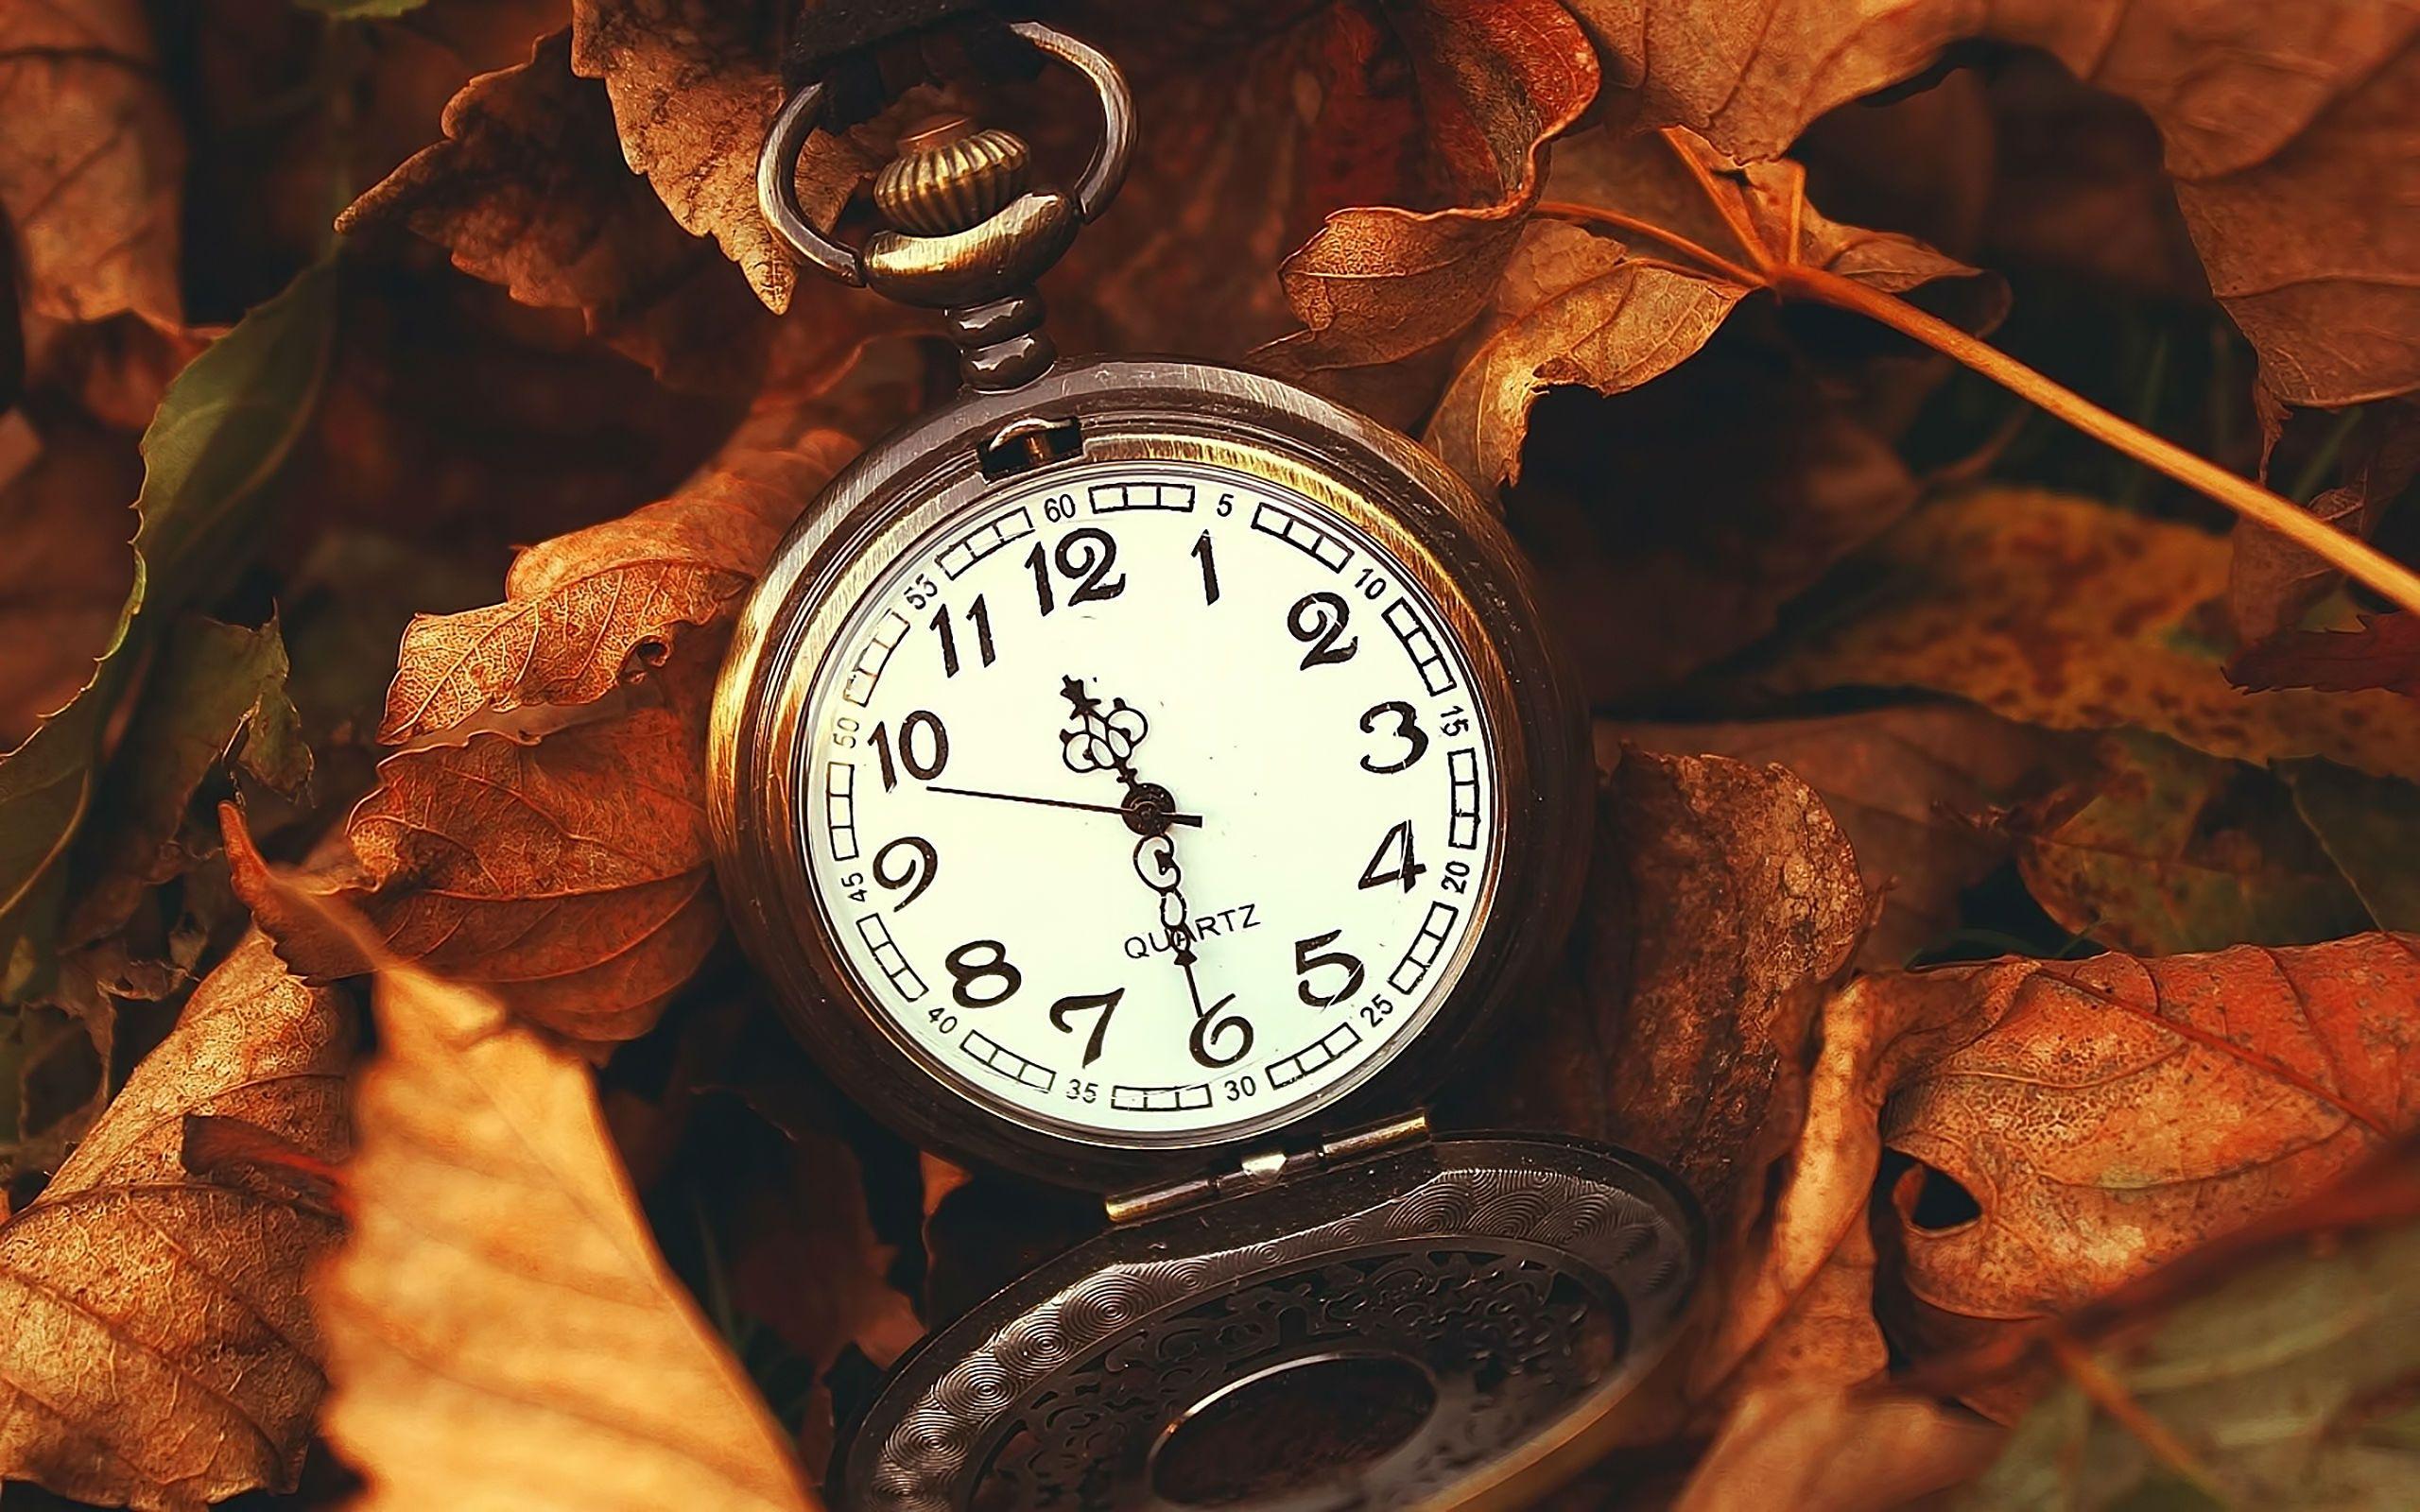 Old Pocket Watch Wallpaper Background 49503 2560x1600 px